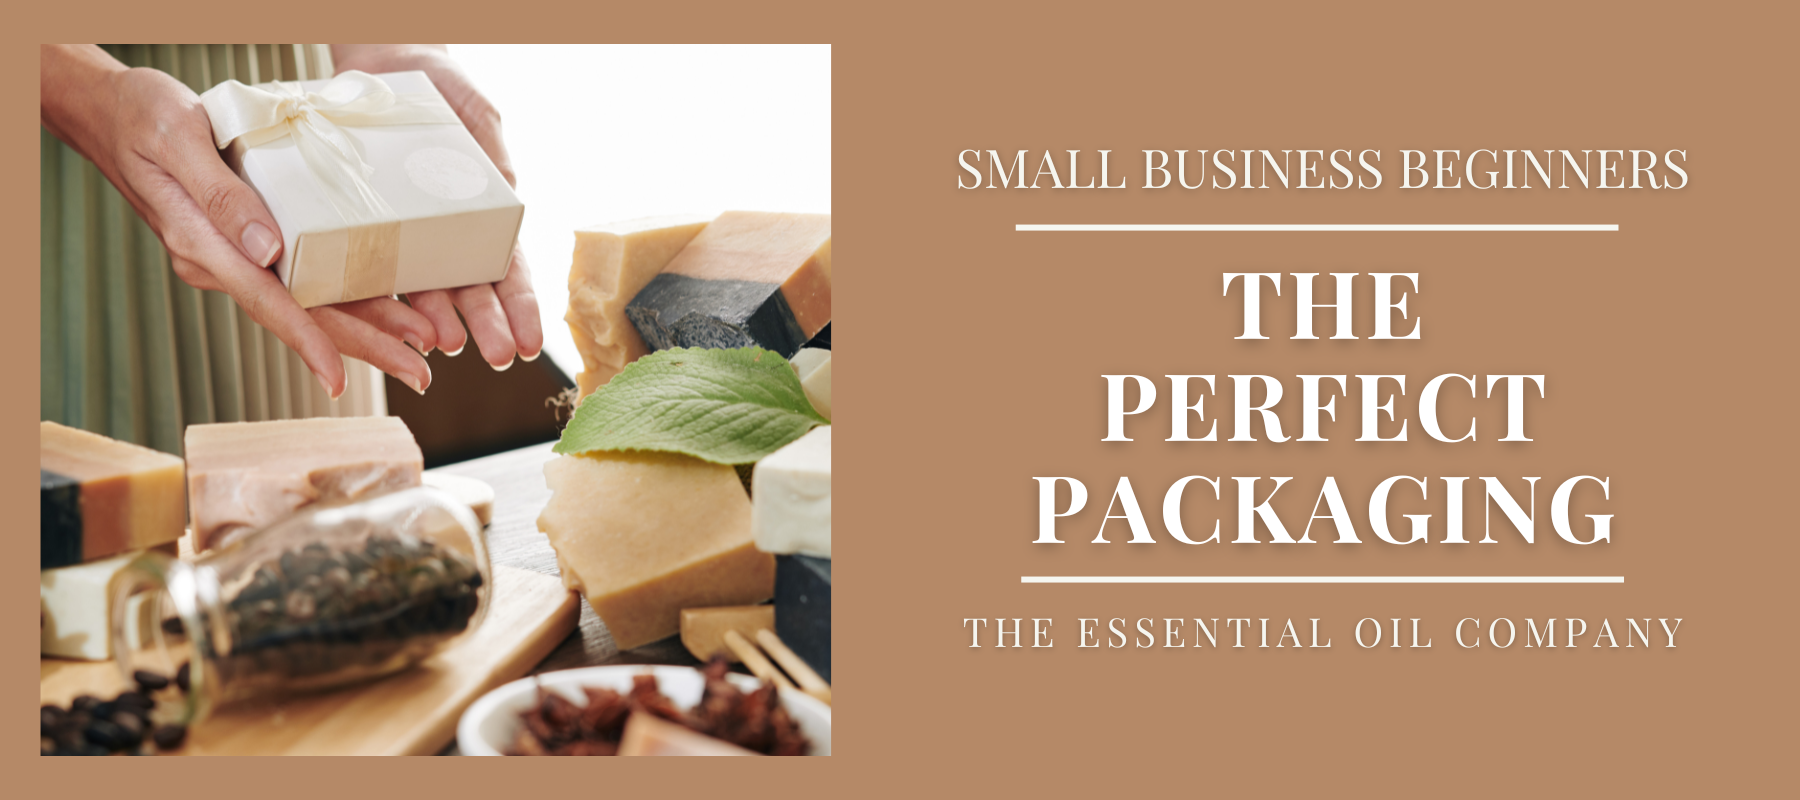 Small Business Beginners: The Perfect Packaging